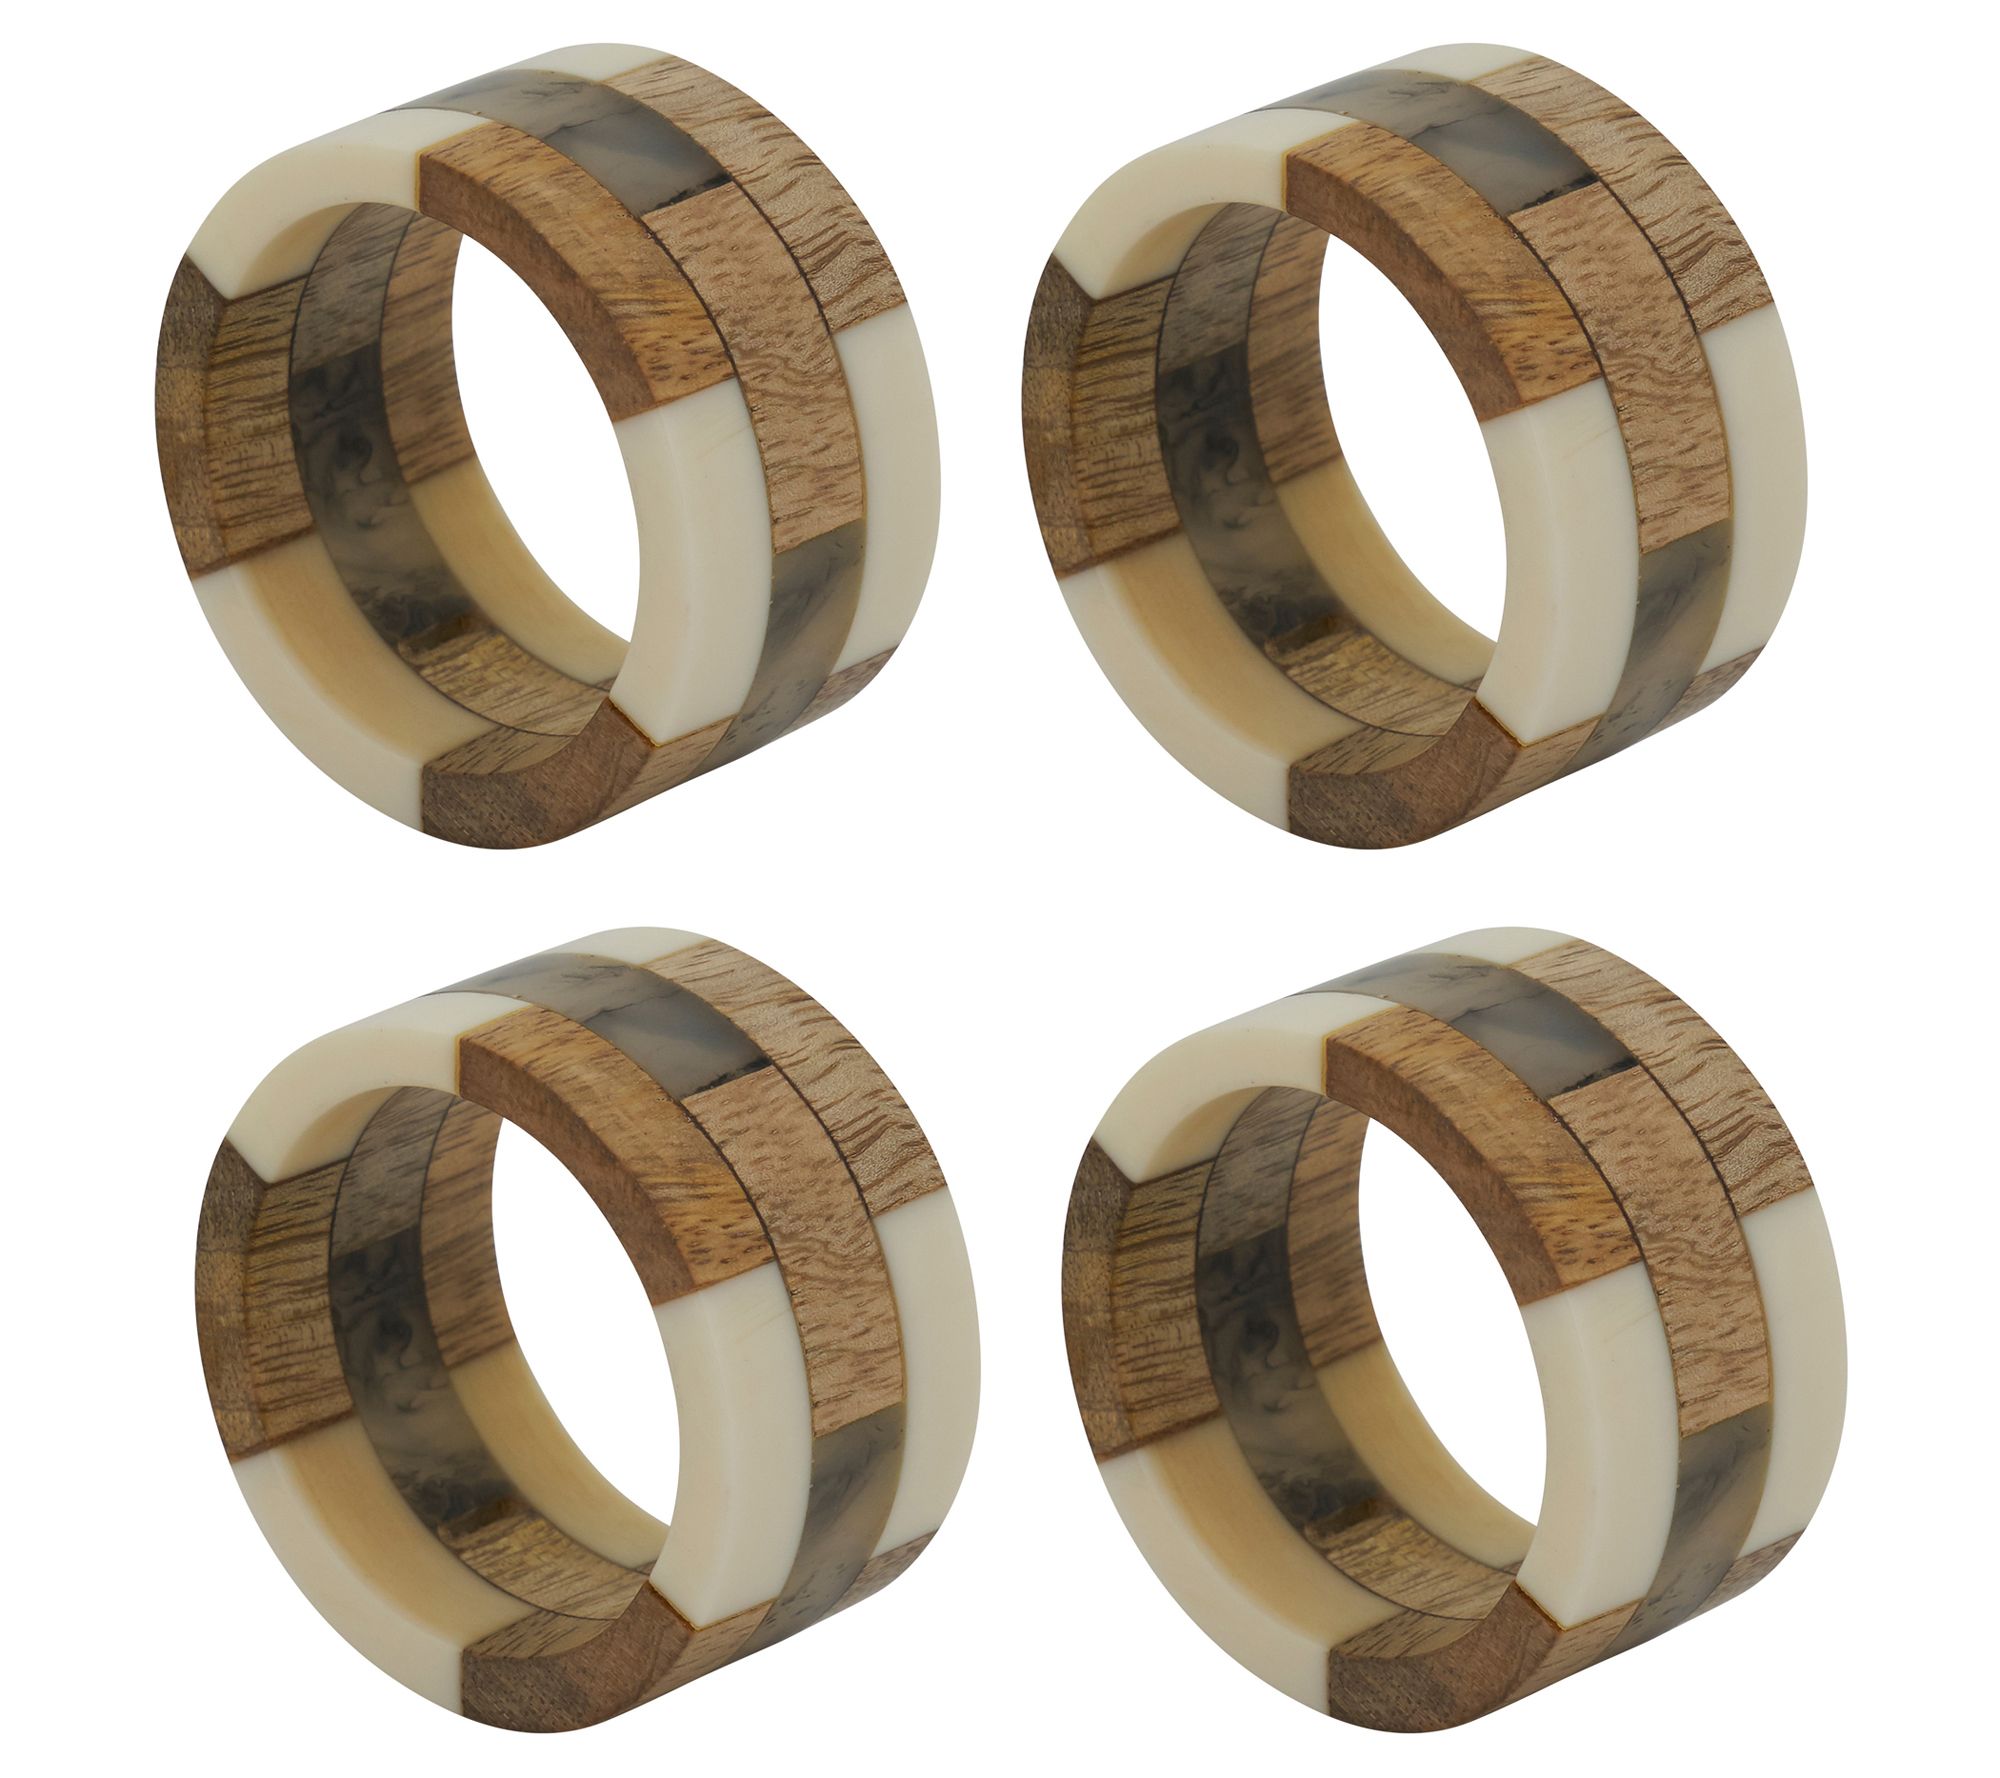 Saro Lifestyle Table Napkin Rings With Rope and Wood Design (Set of 4)